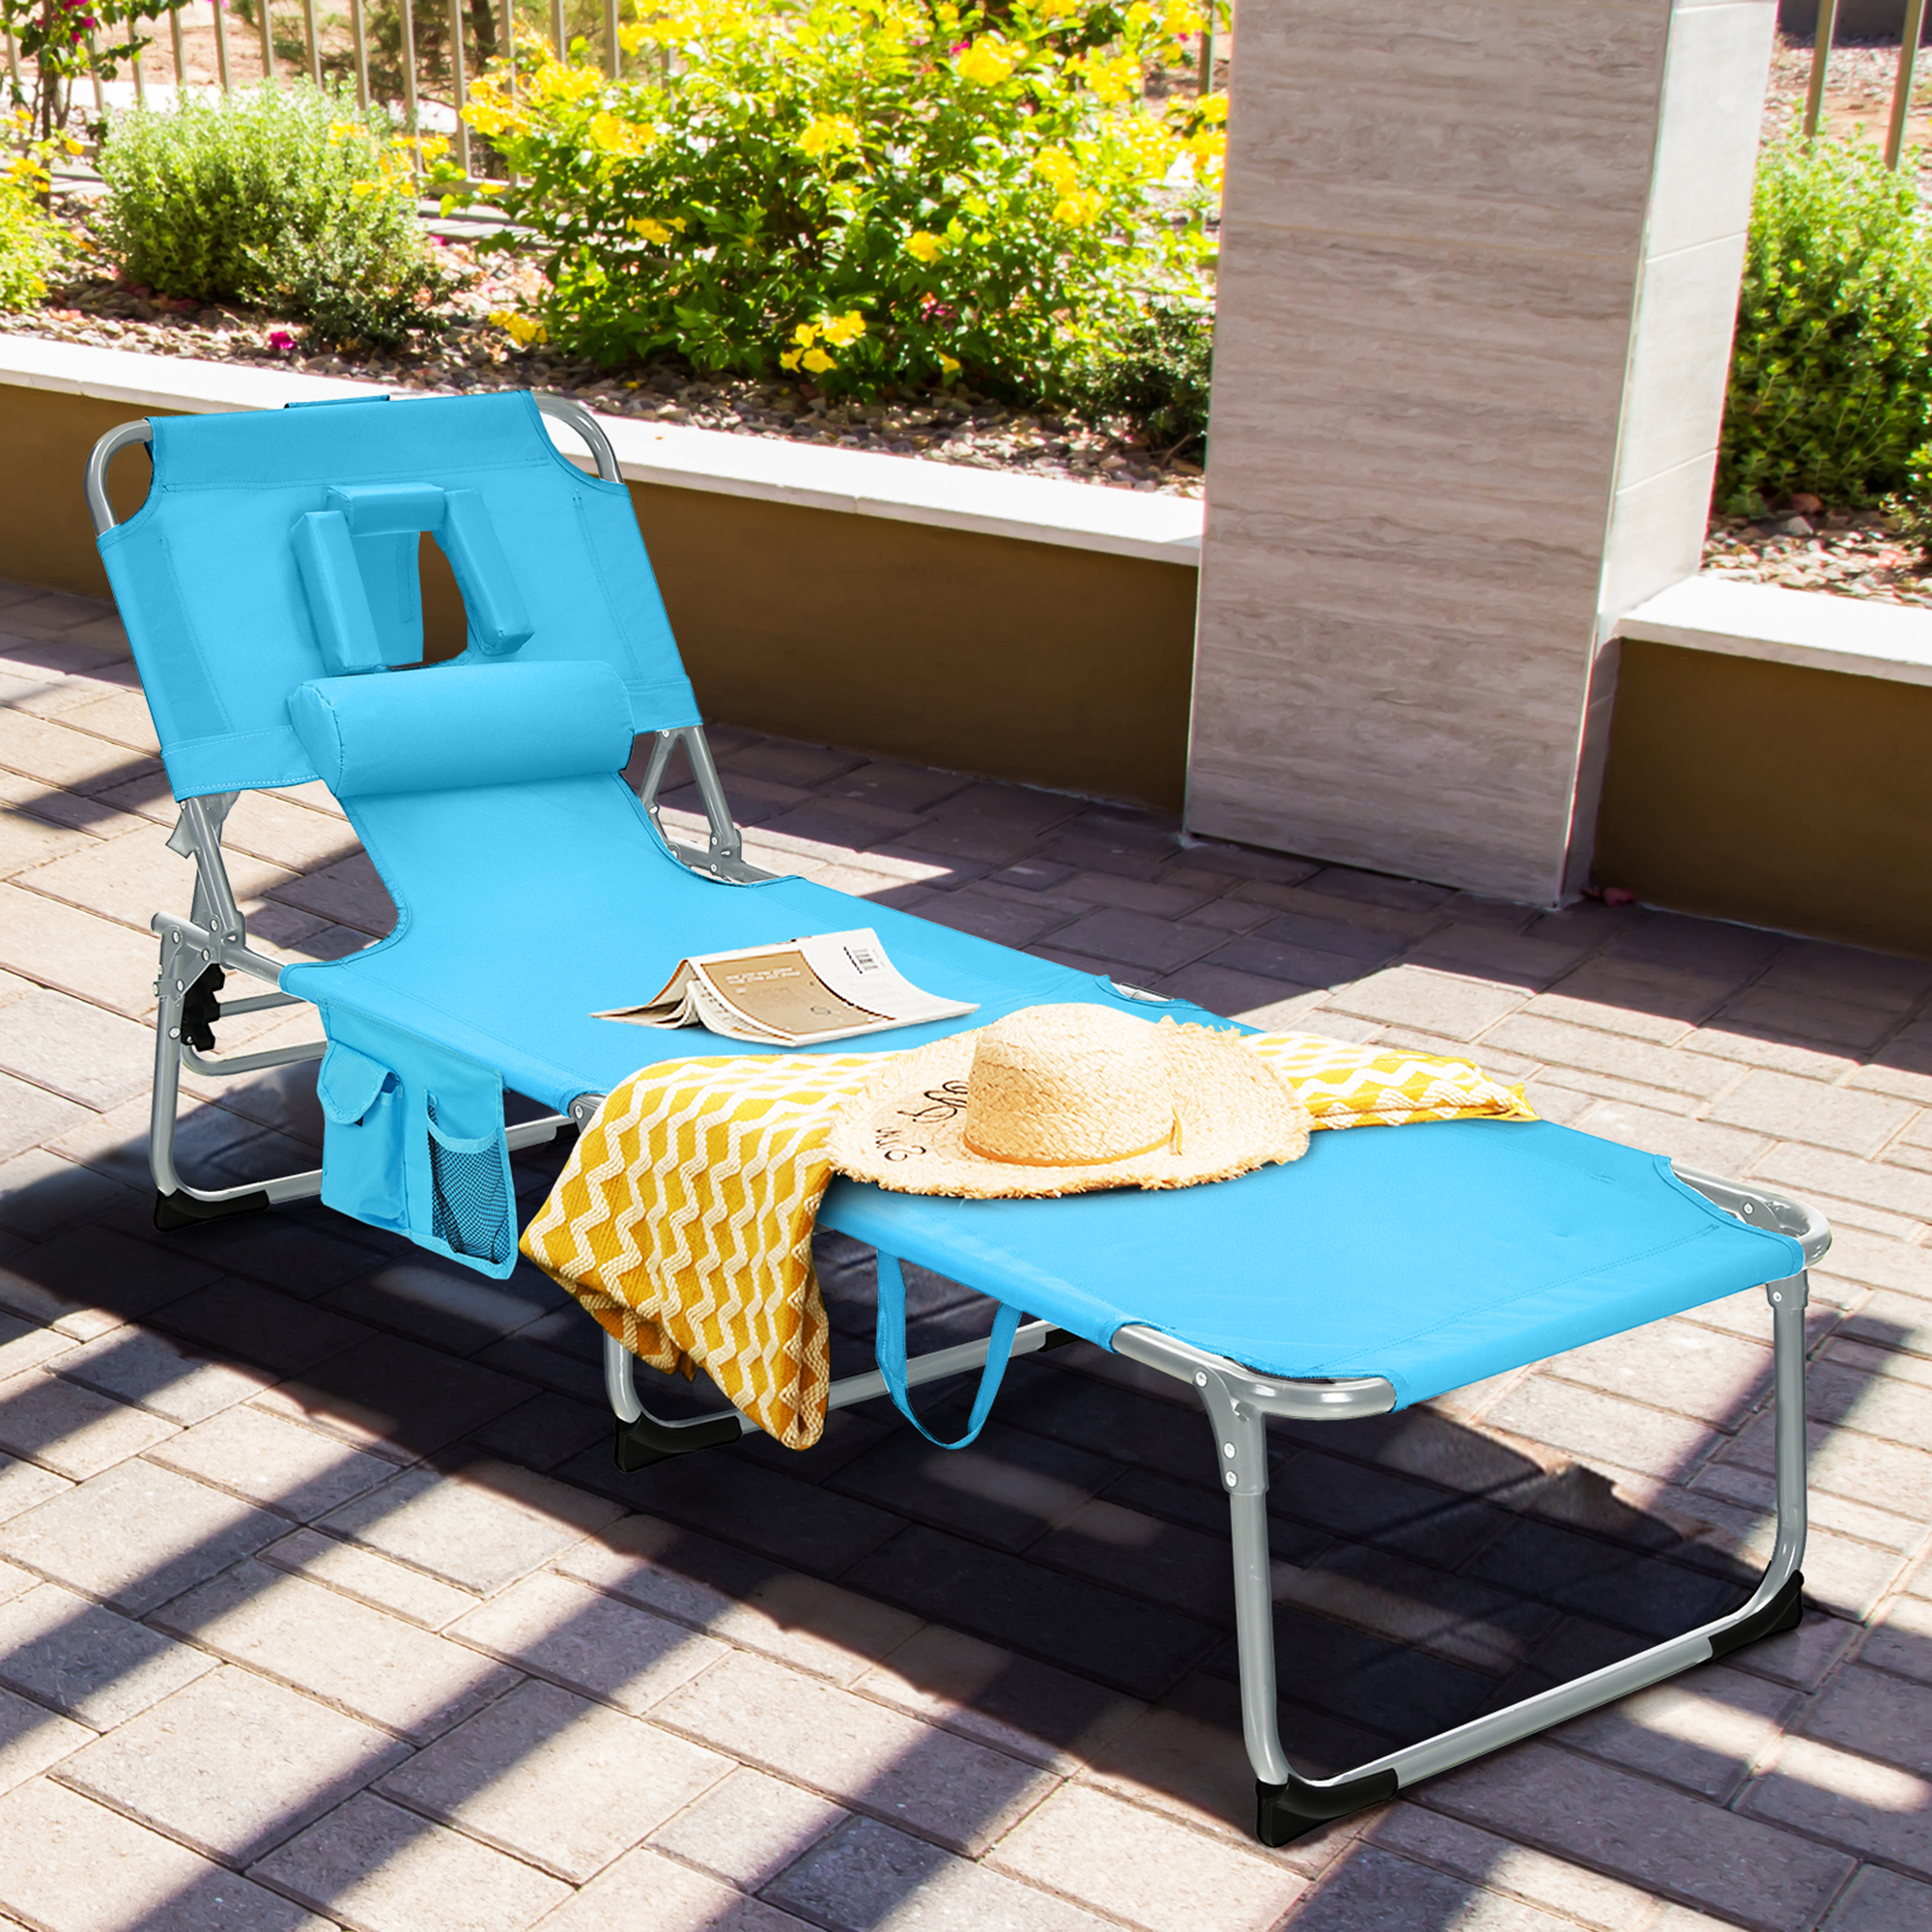 Gymax Portable Beach Chaise Lounge Chair Folding Reclining Chair w/ Facing Hole Turquoise - image 1 of 10